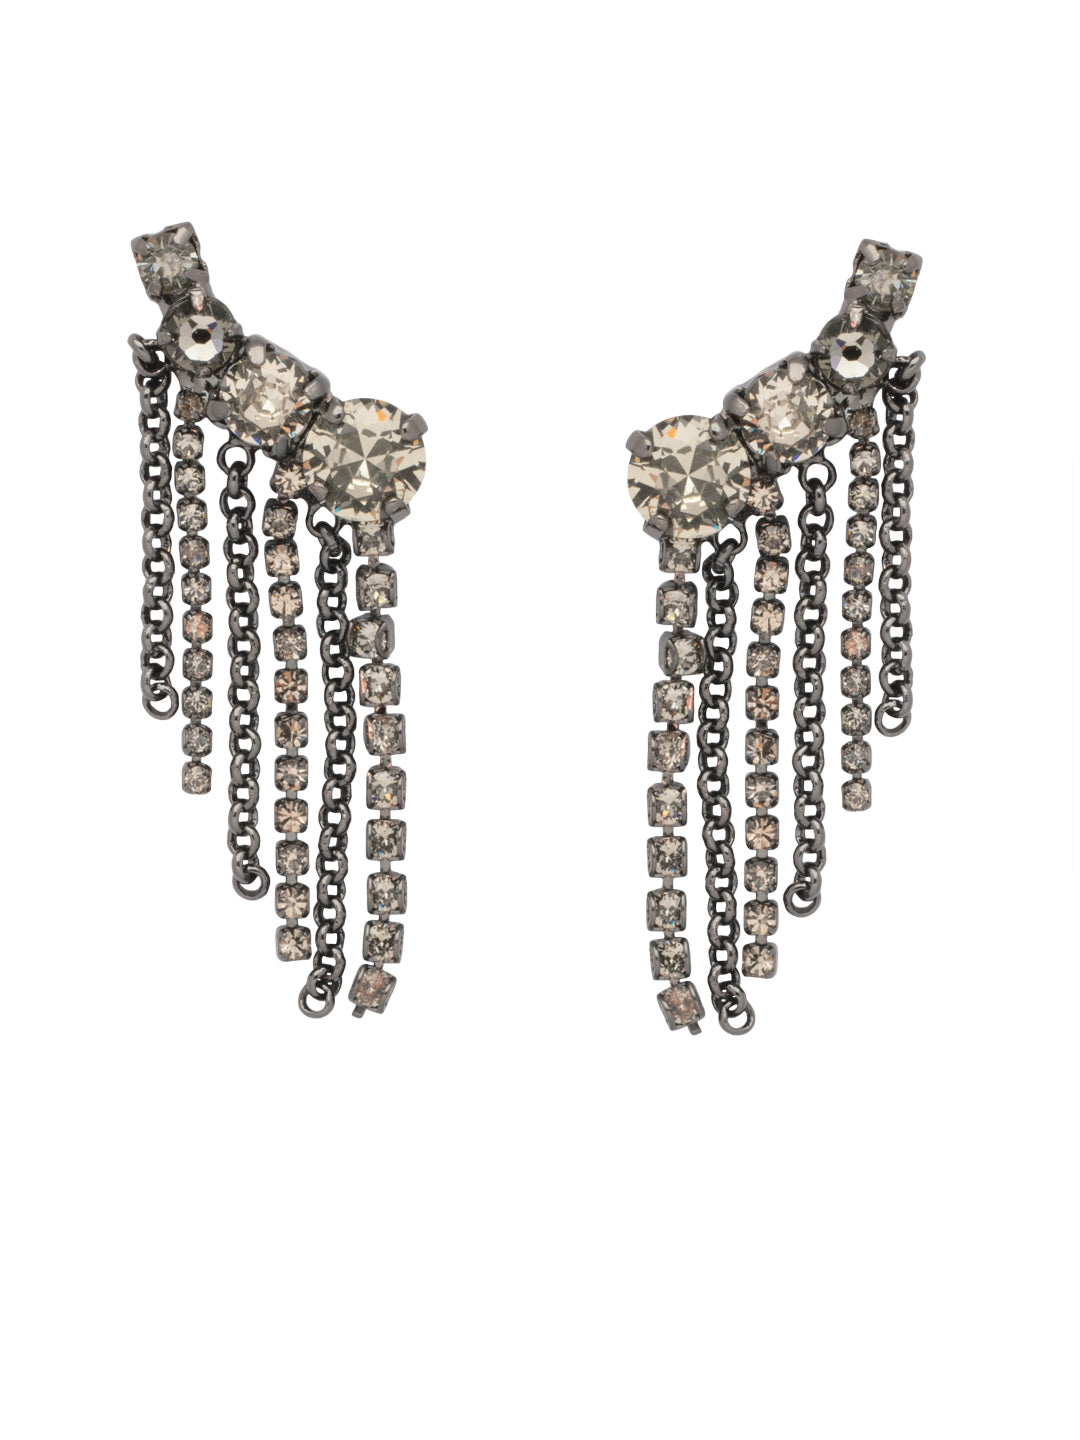 Curtain Climber Statement Earrings - 4EFL2GMBD - <p>The Curtain Climber Statement Earrings feature a row of round cut crystals climbing up with chains of rhinestone crystals dangling beneath. From Sorrelli's Black Diamond collection in our Gun Metal finish.</p>